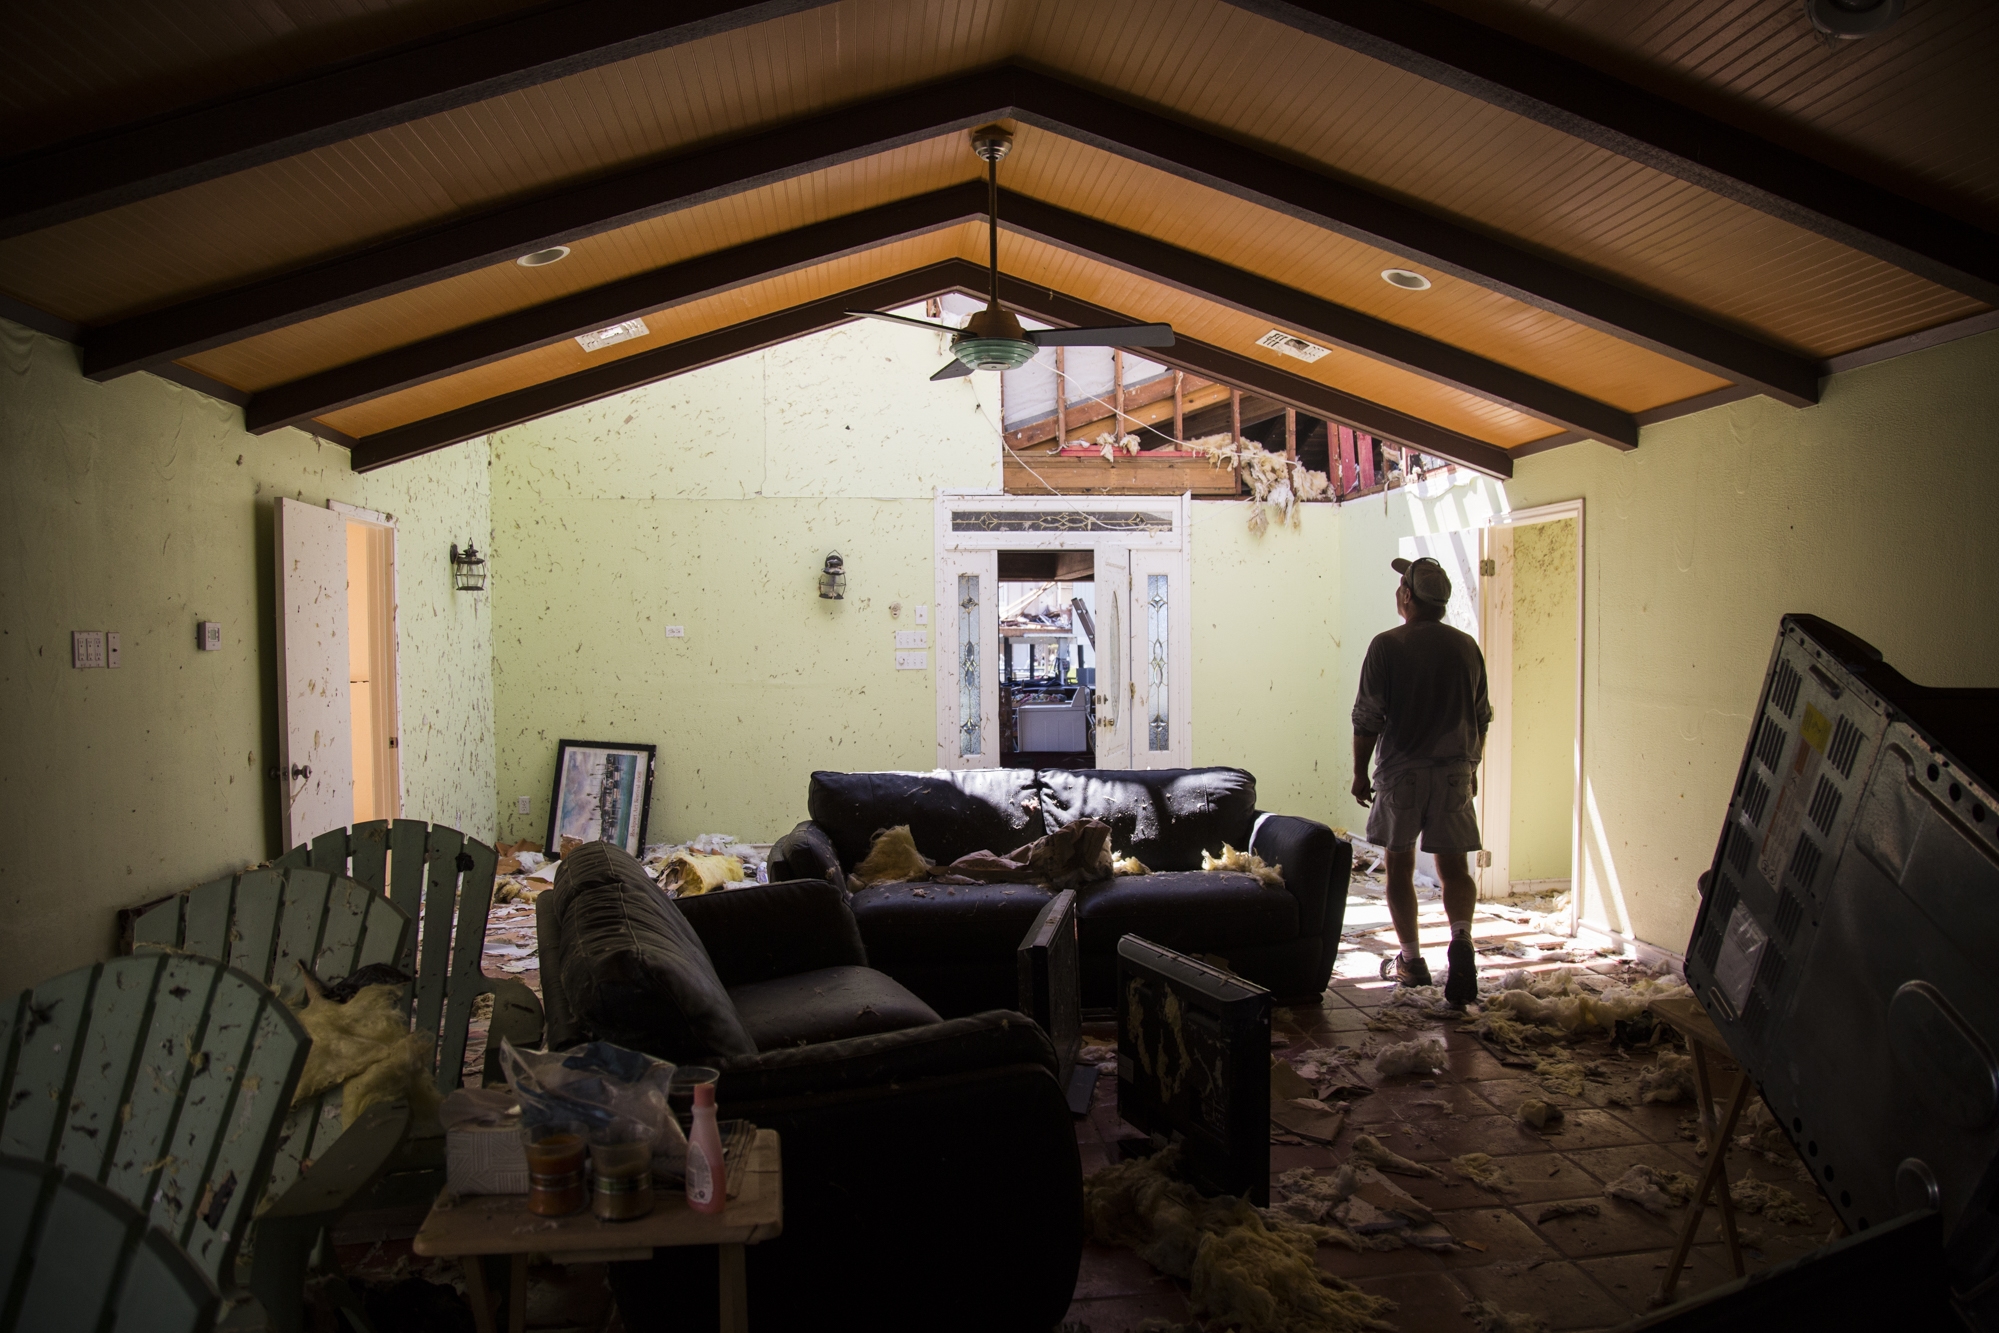 Dennis Young, 63, walks through his waterfront home in Rockport, Texas in September 2017 after it was destroyed by Hurricane Harvey. In their series "Hidden in Plain Sight," the Advocate takes a look at income inequality worsened by the hurricane